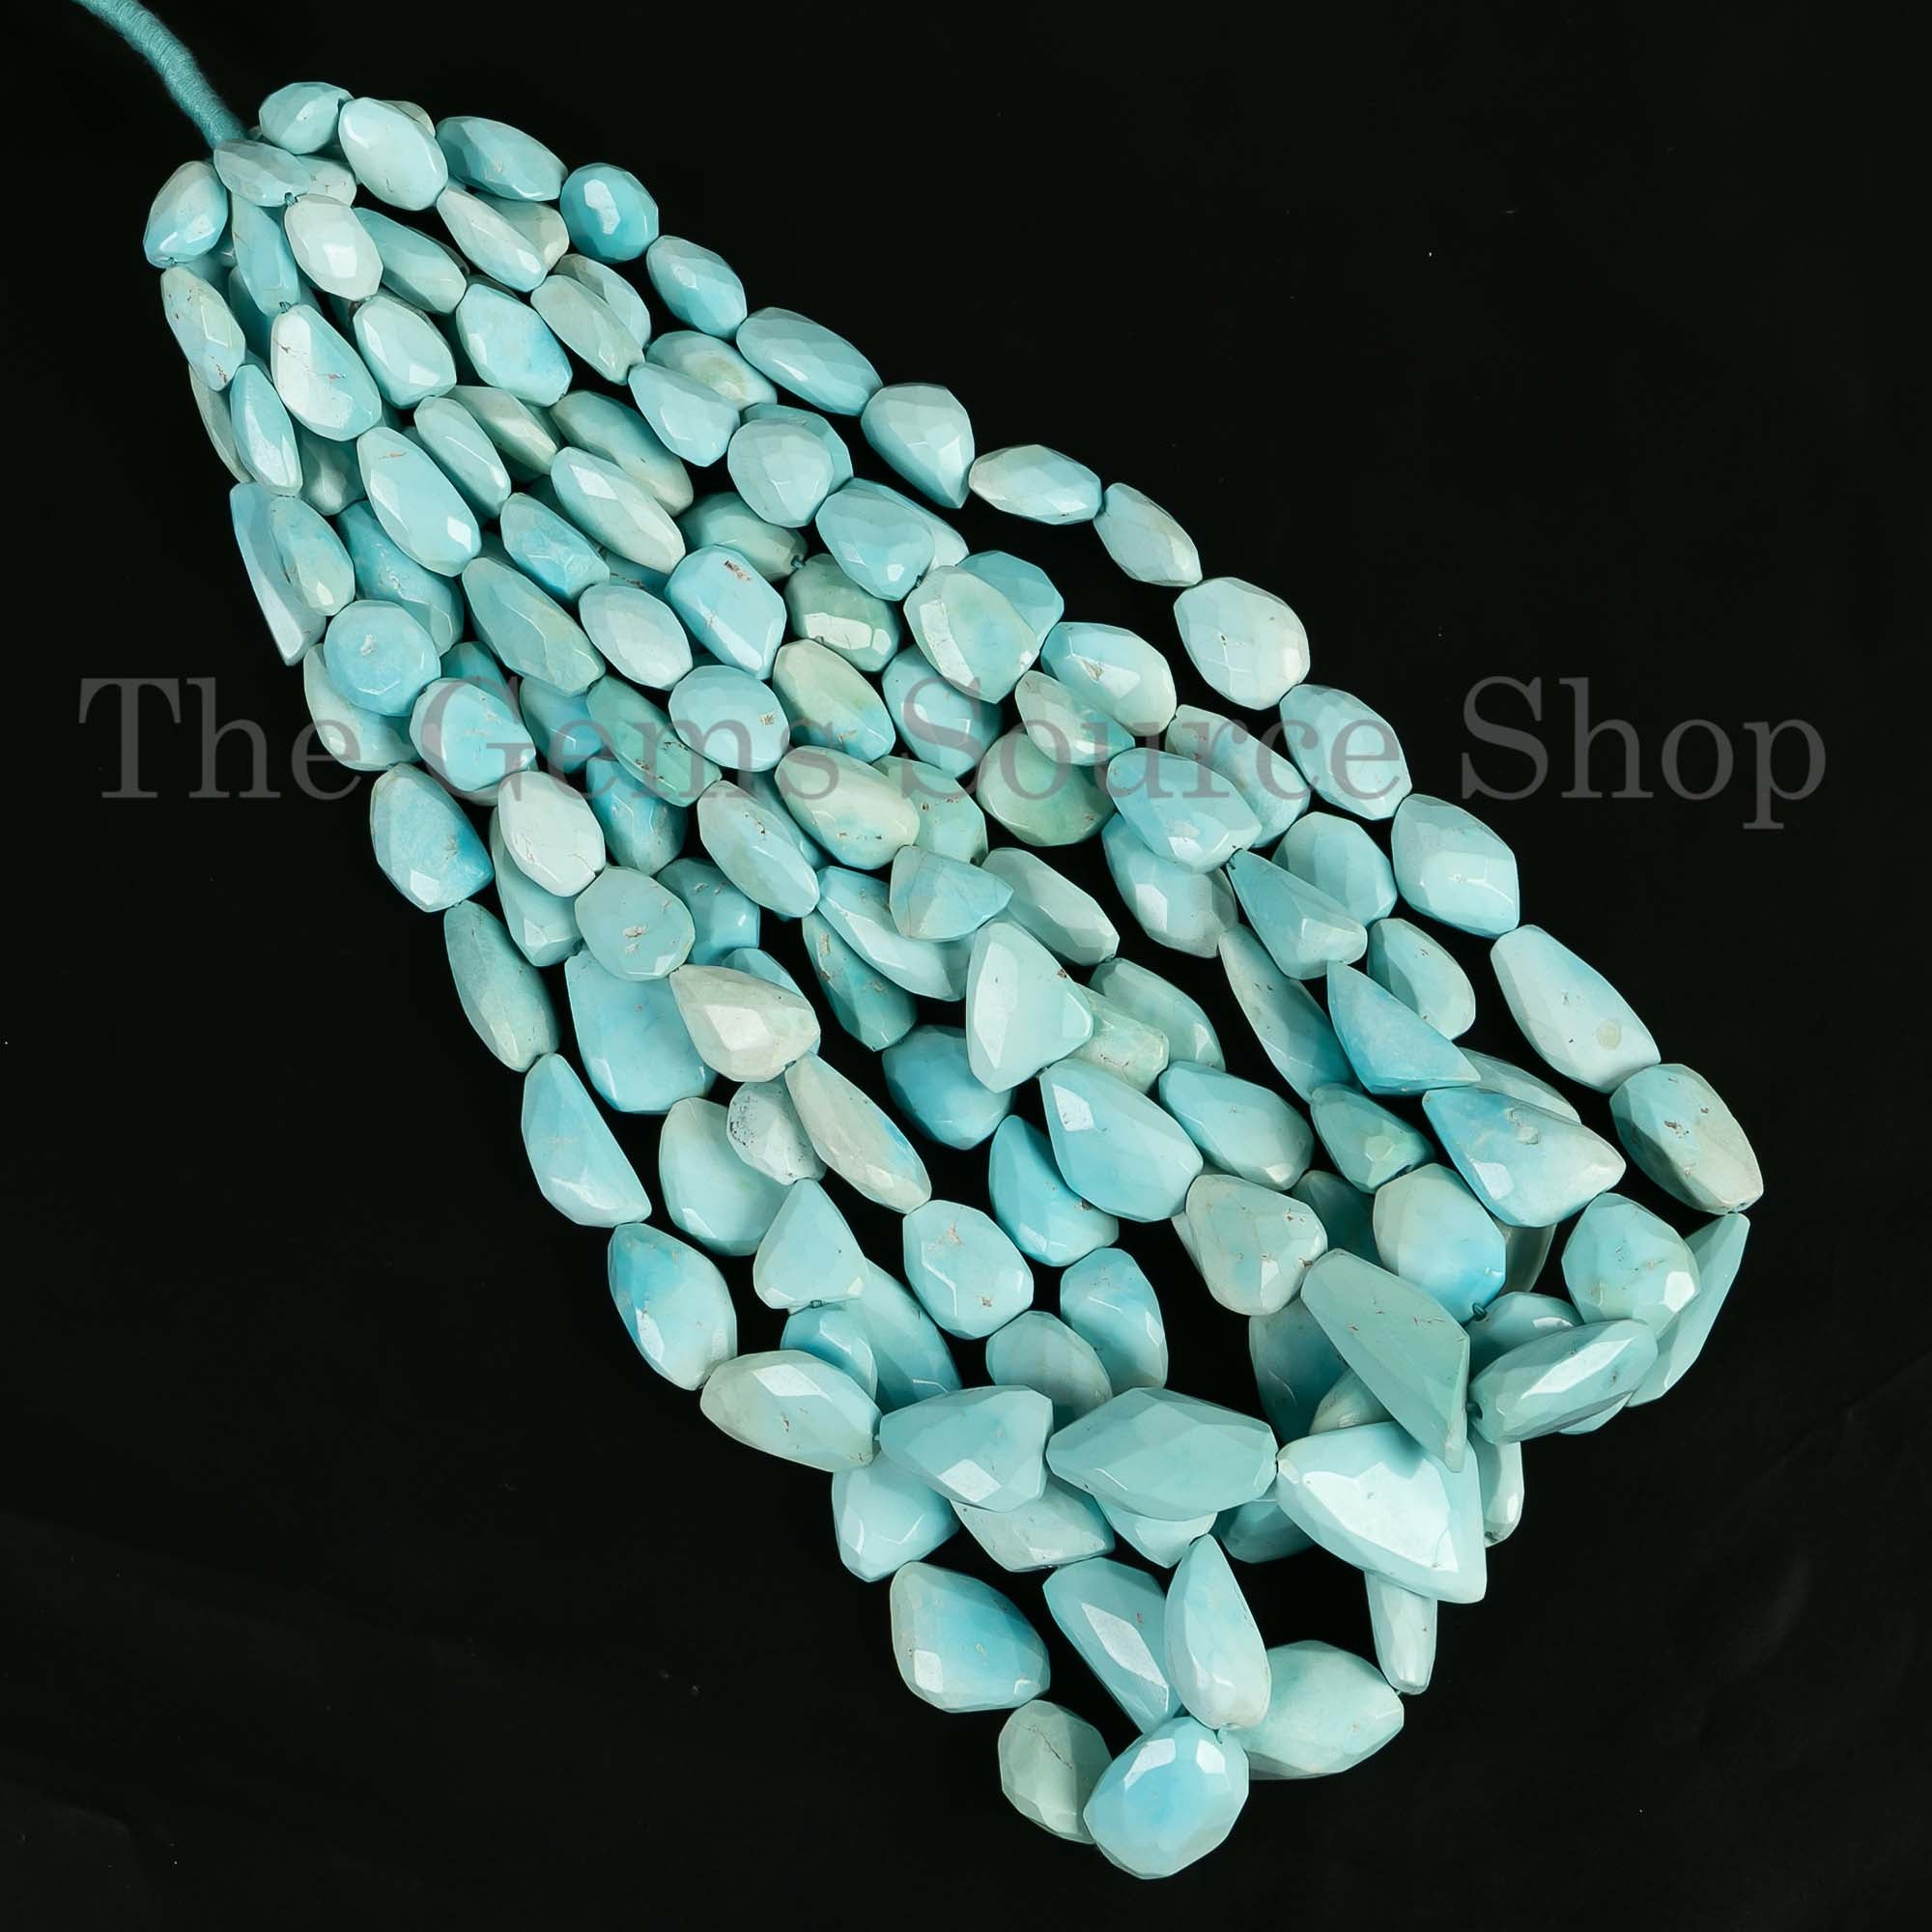 Sleeping Beauty Turquoise Nuggets, Loose Turquoise Briolette Tumbles, Turquoise Beads For Jewelry